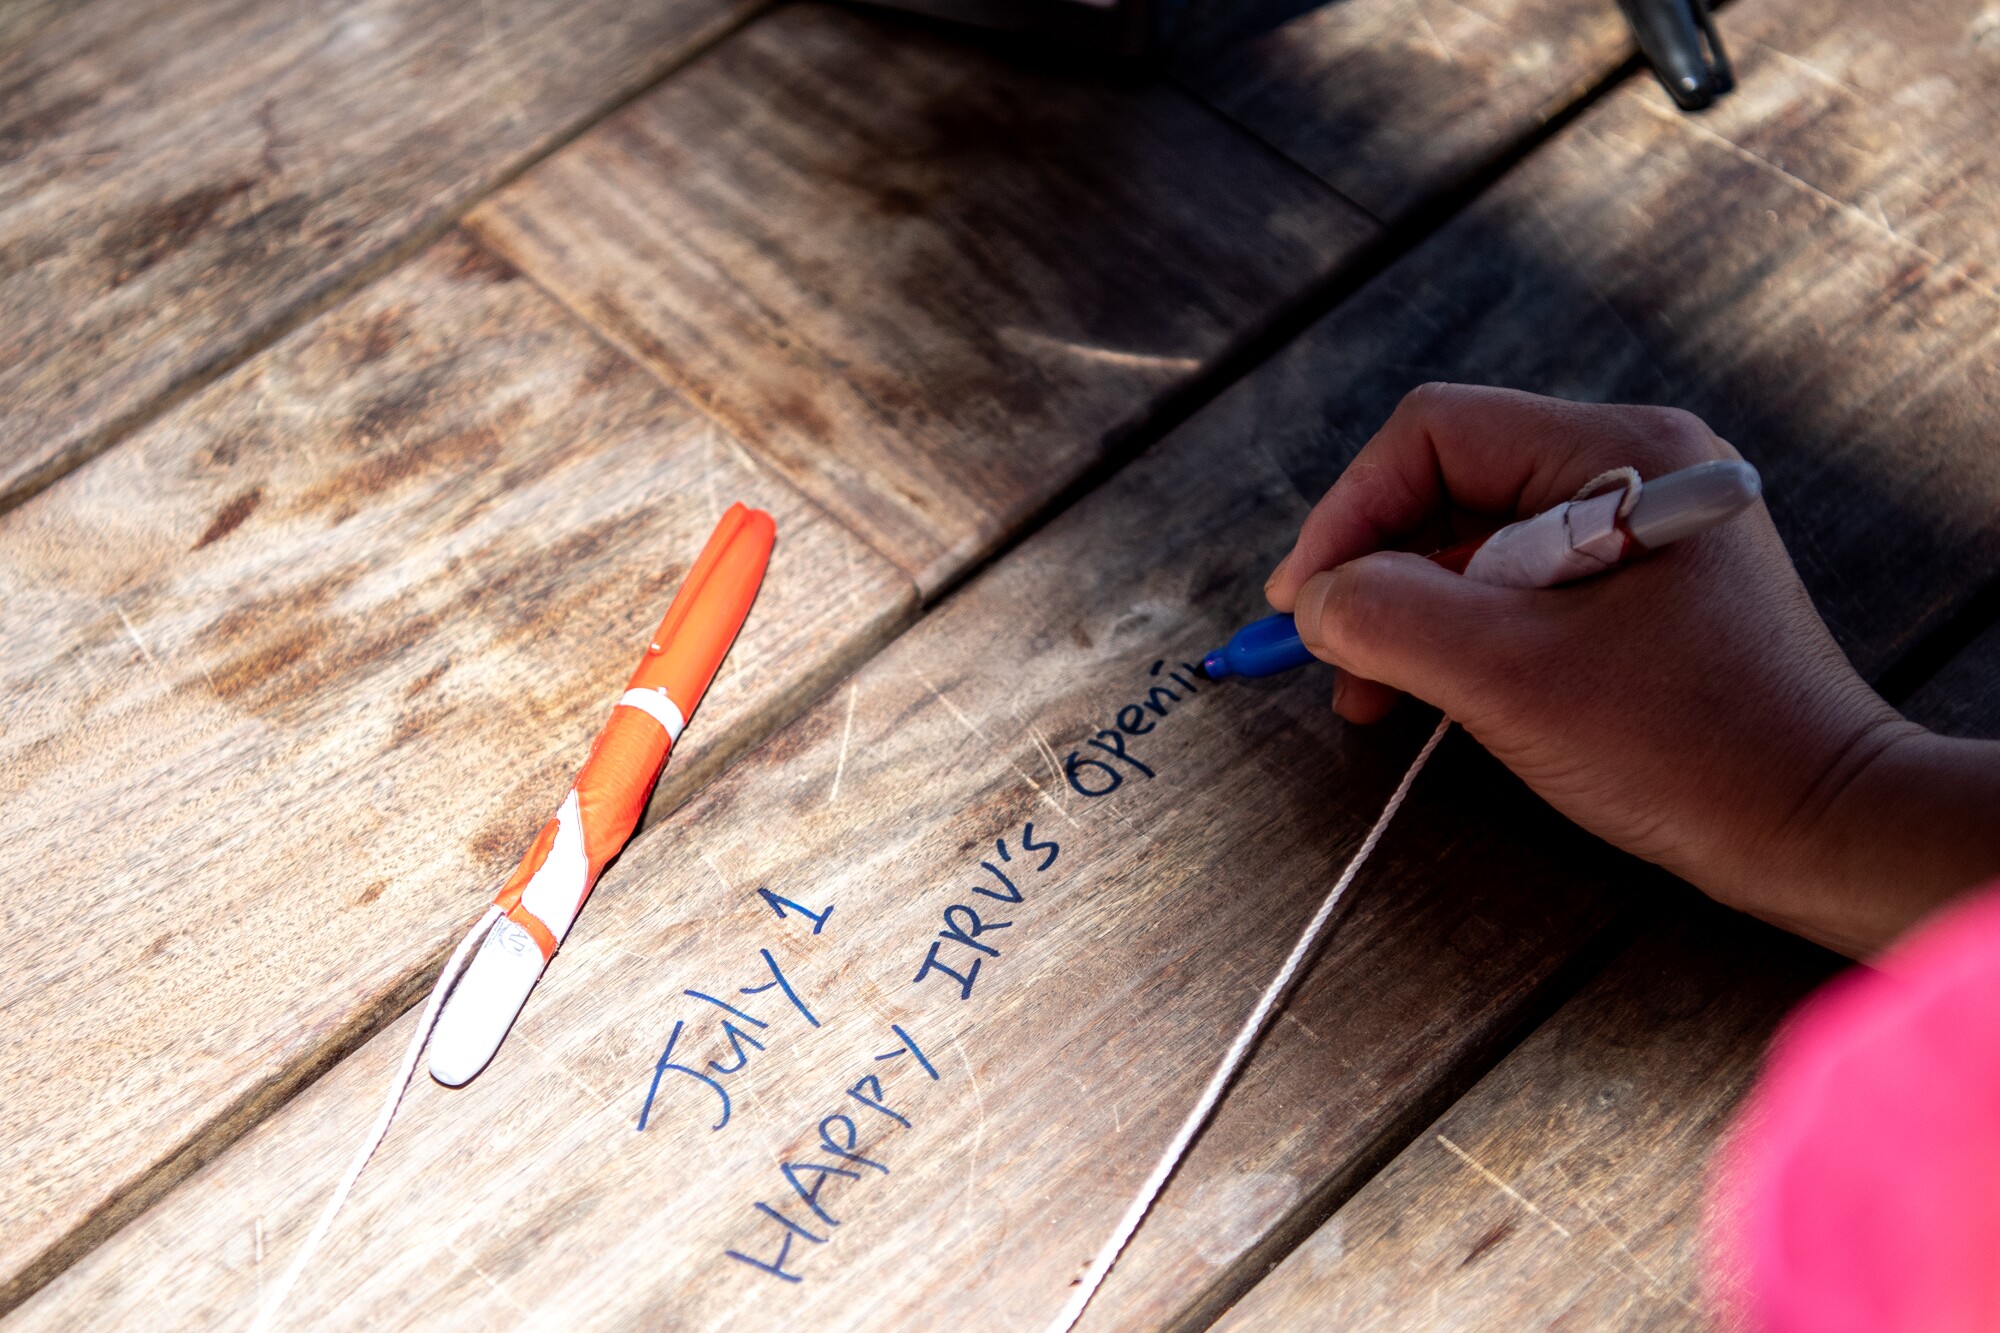 A photo of a hand writing "July 1 Happy Irv's Opening" on a wooden table.